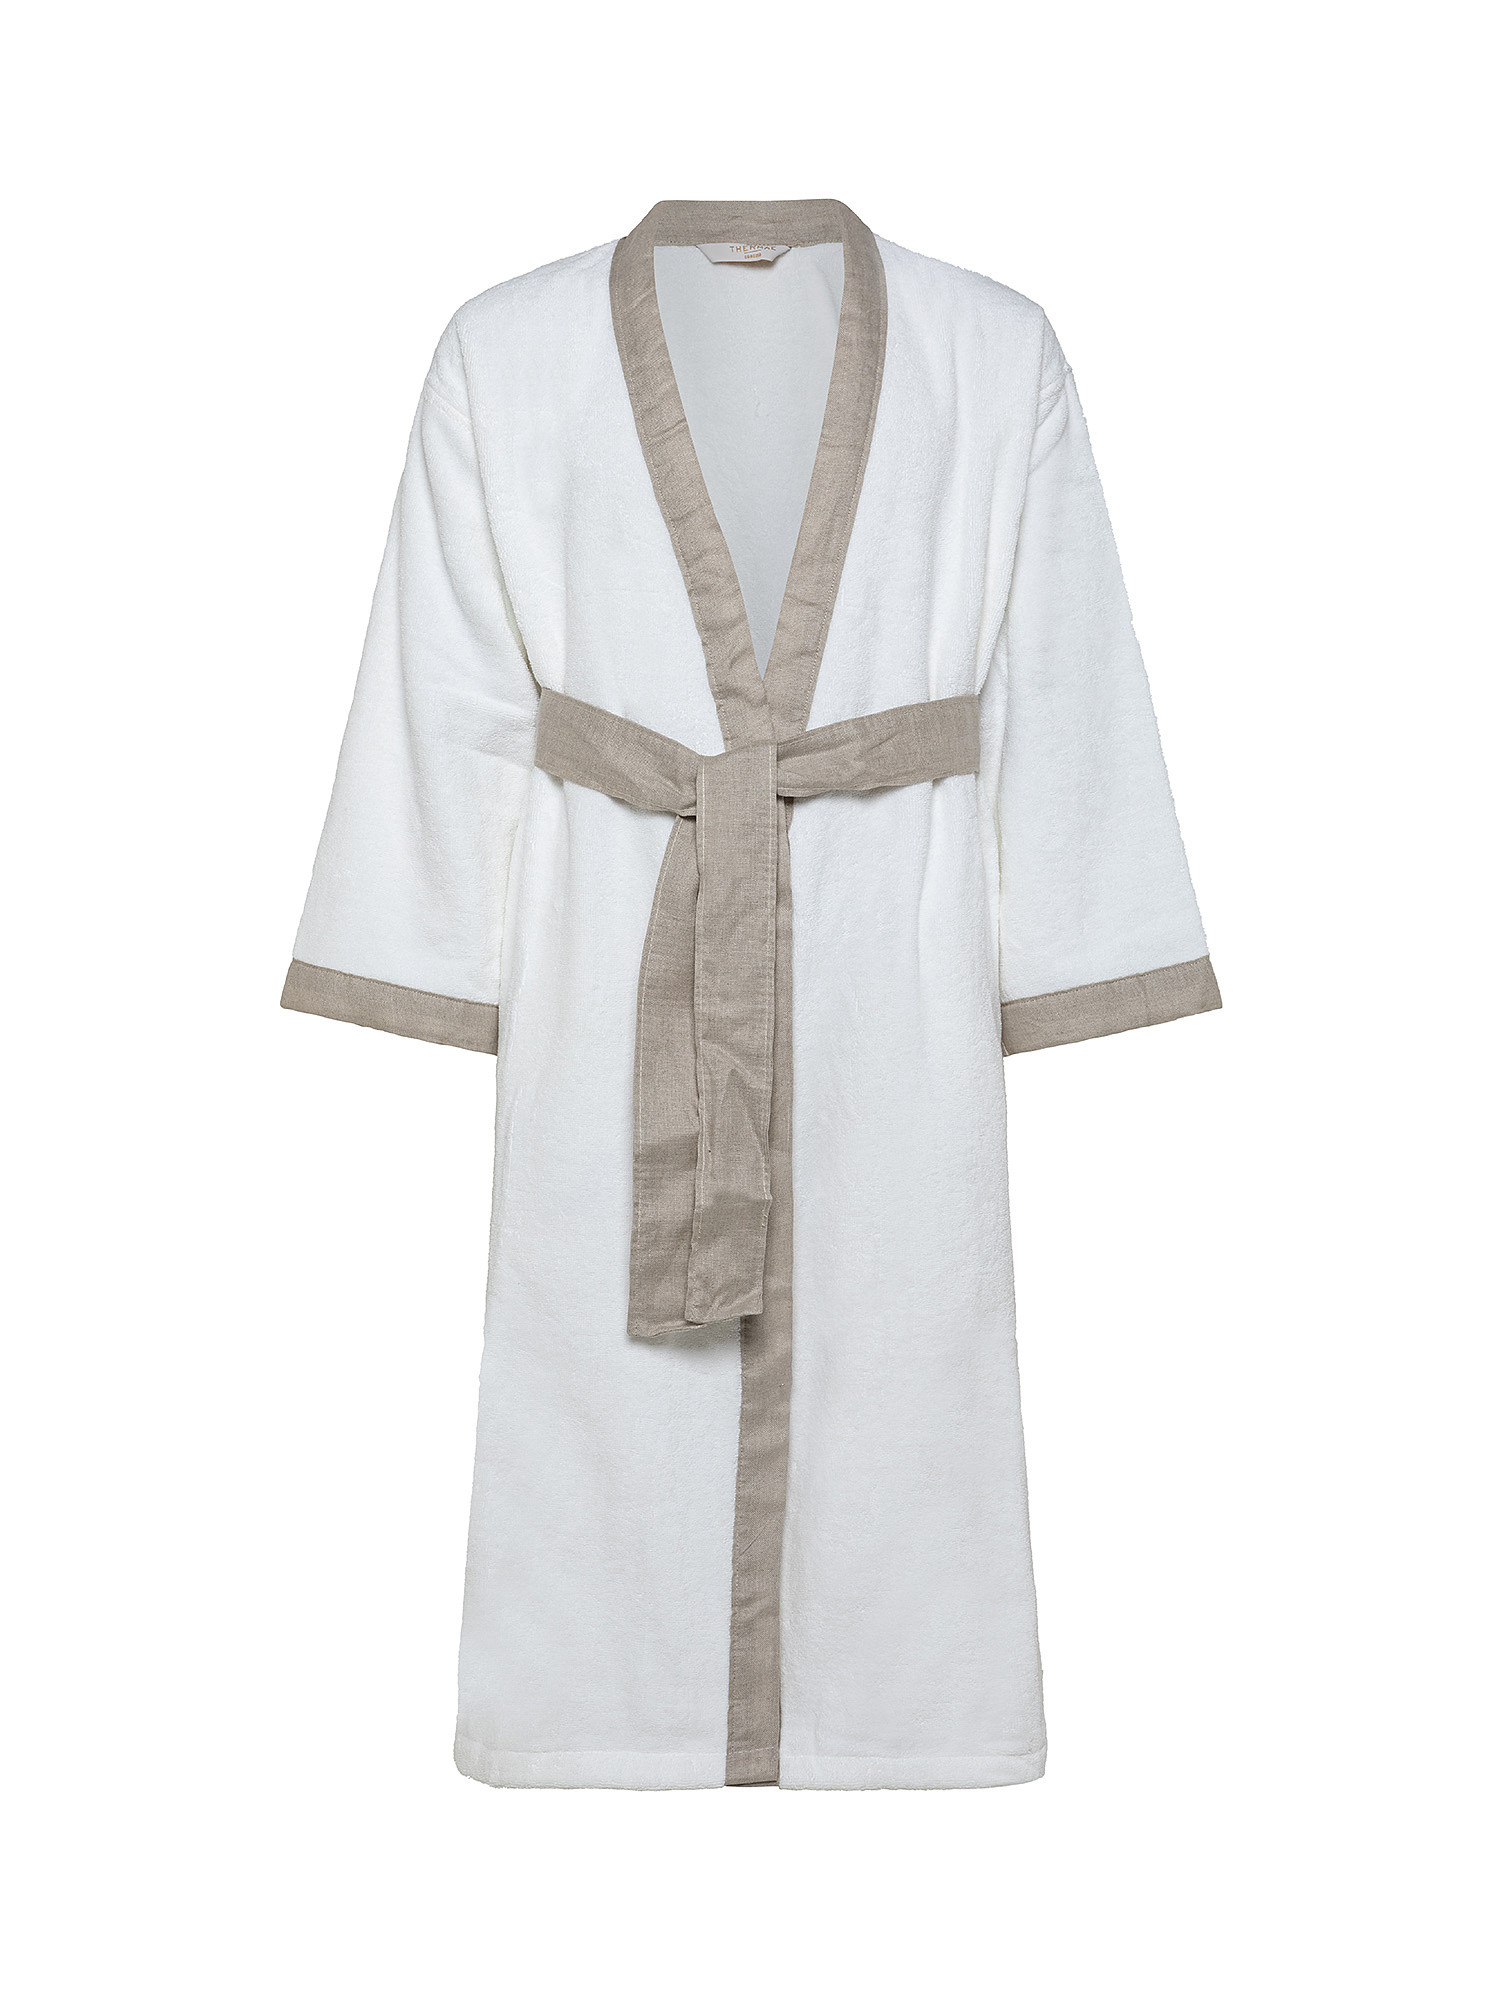 Thermae robe with linen trim, White / Brown, large image number 0